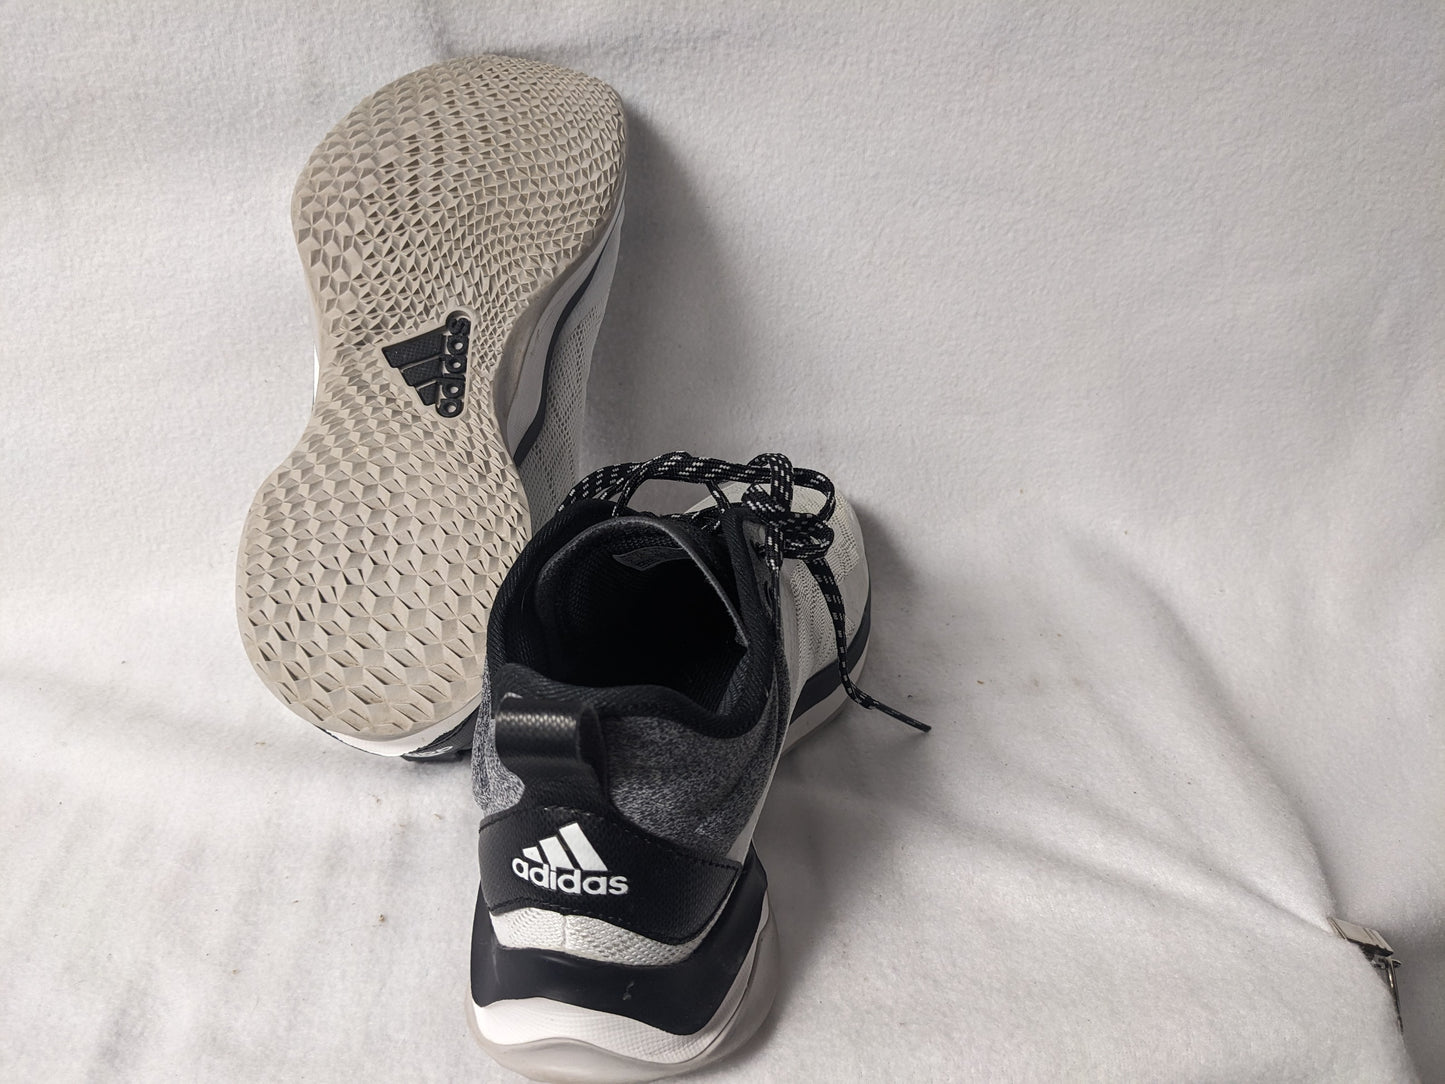 Adidas Athletic Shoes Size 7 Color White Condition Used